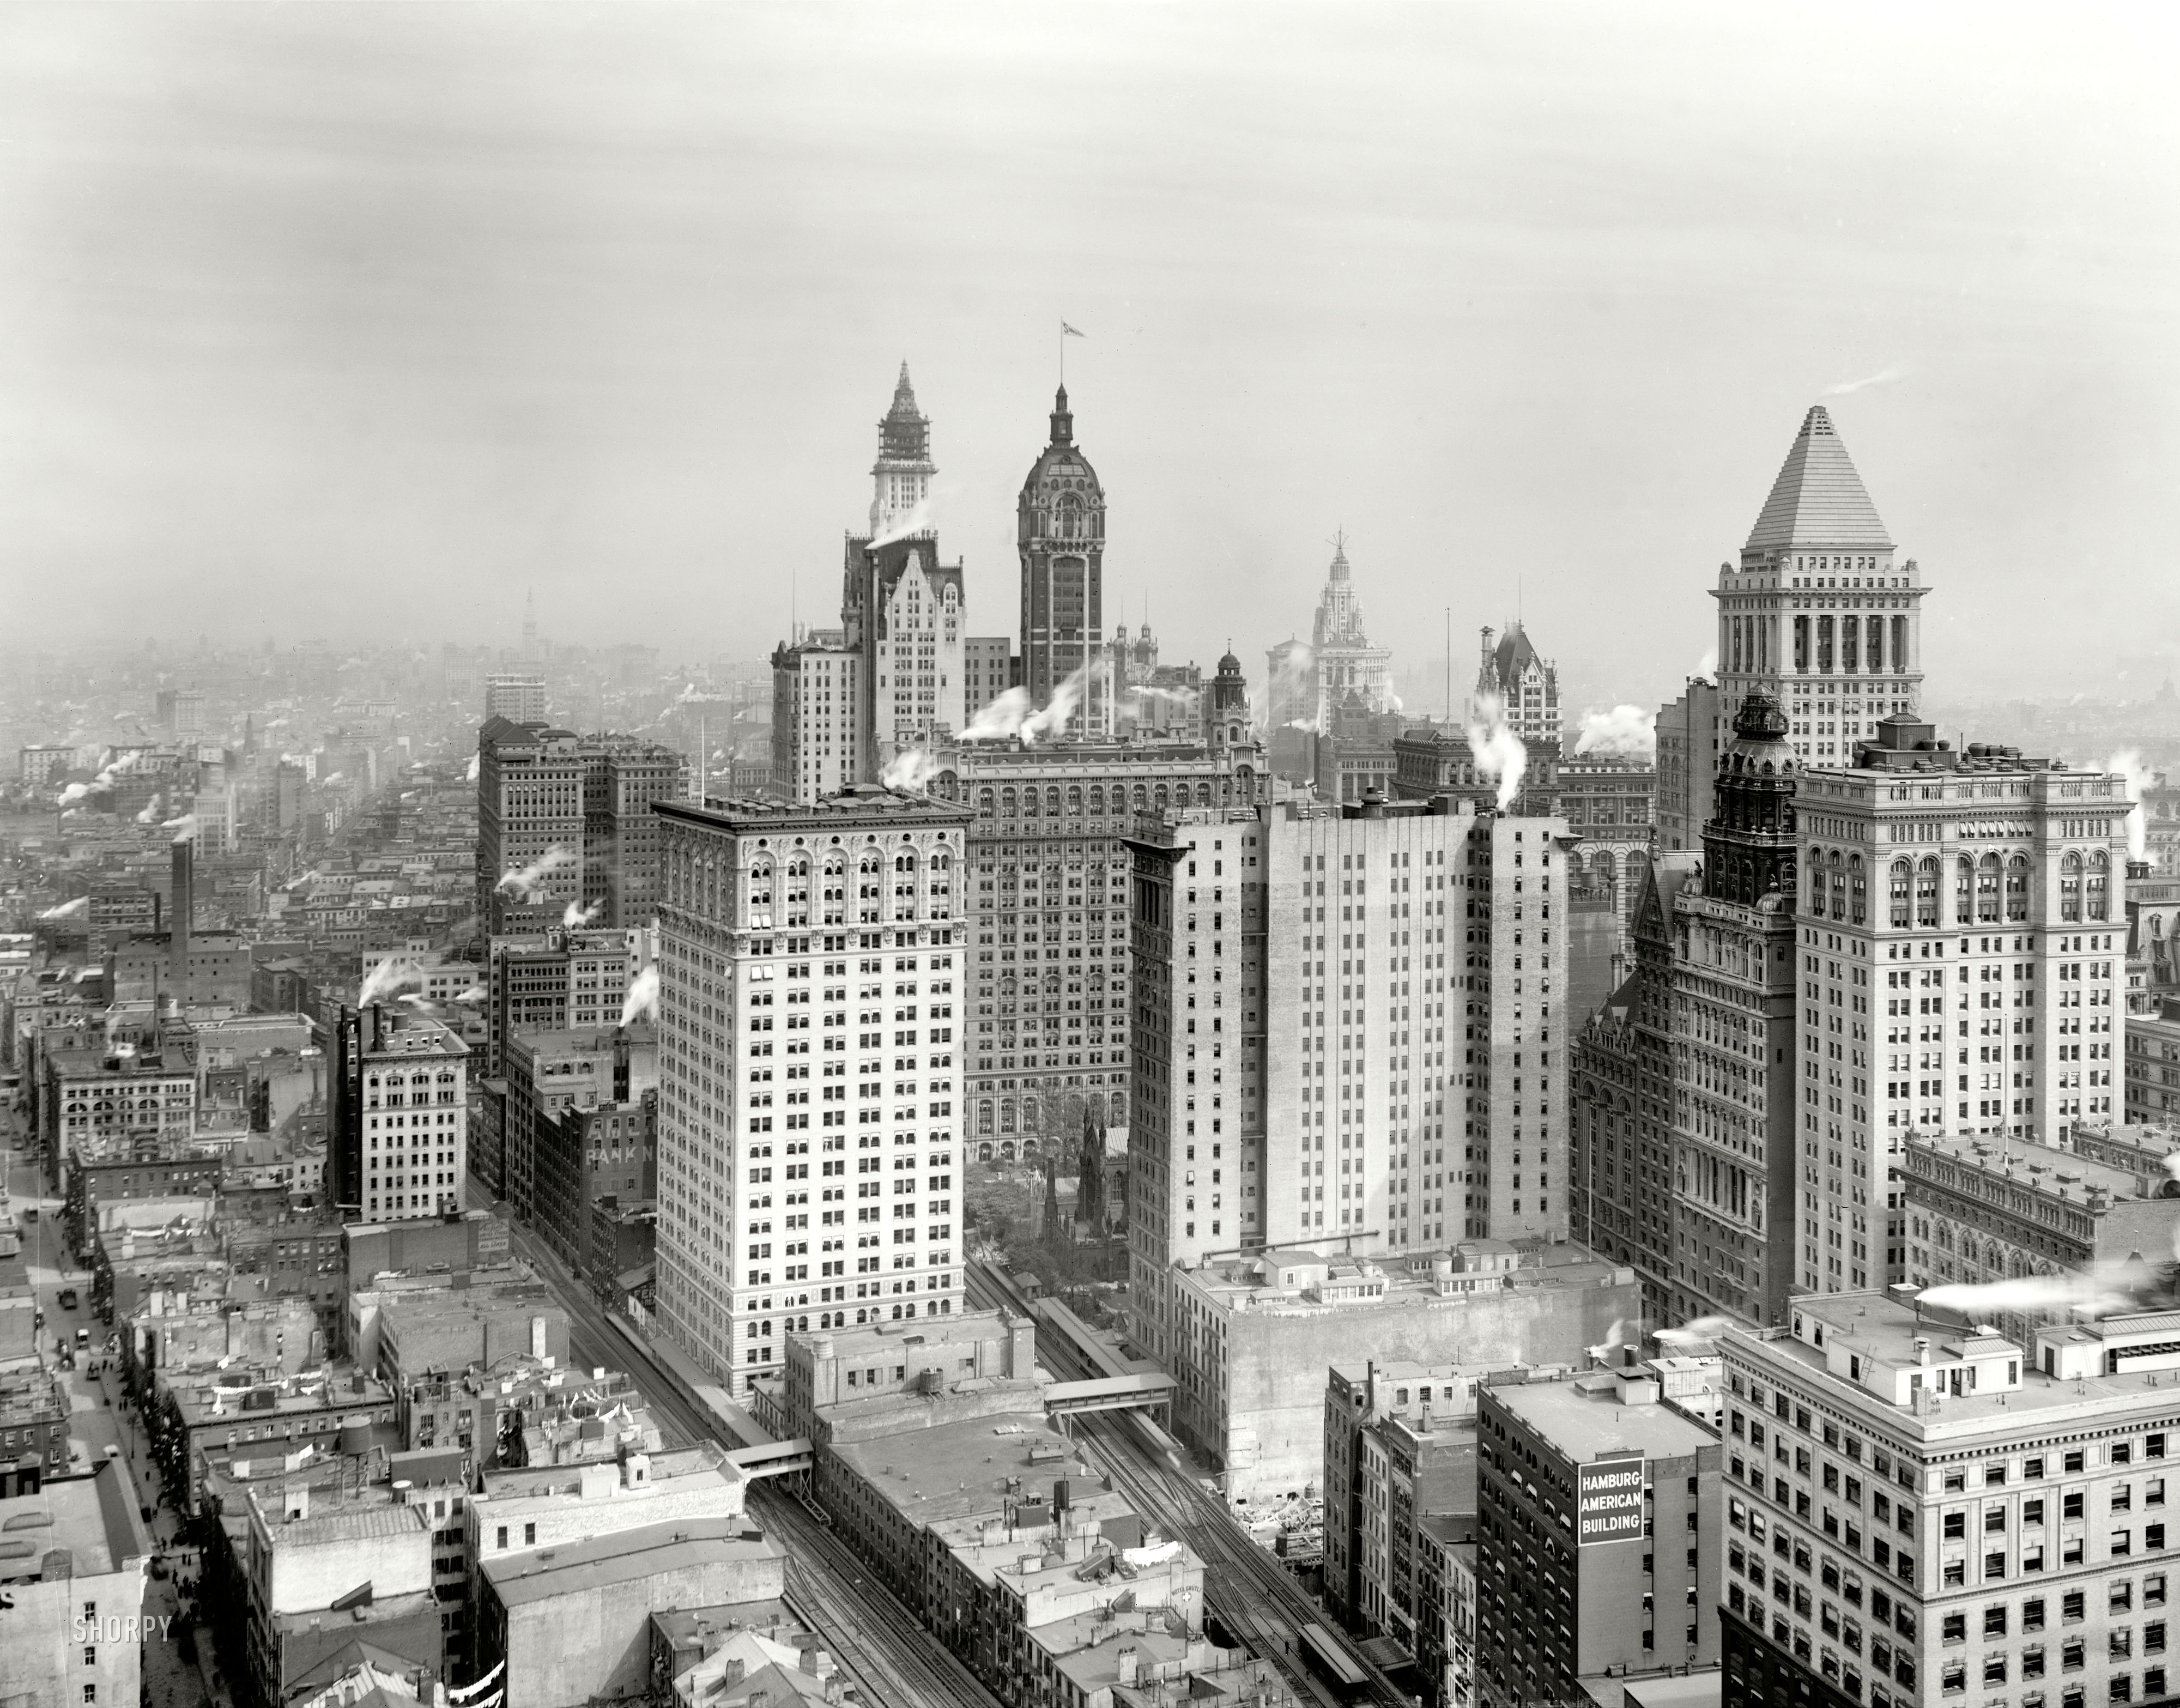 New York circa 1912. "Big buildings of Lower Manhattan." Landmarks here include the Singer Building and, under construction, the Woolworth tower. And let's not overlook the Hotel Grütli. Detroit Publishing Company. View full size.